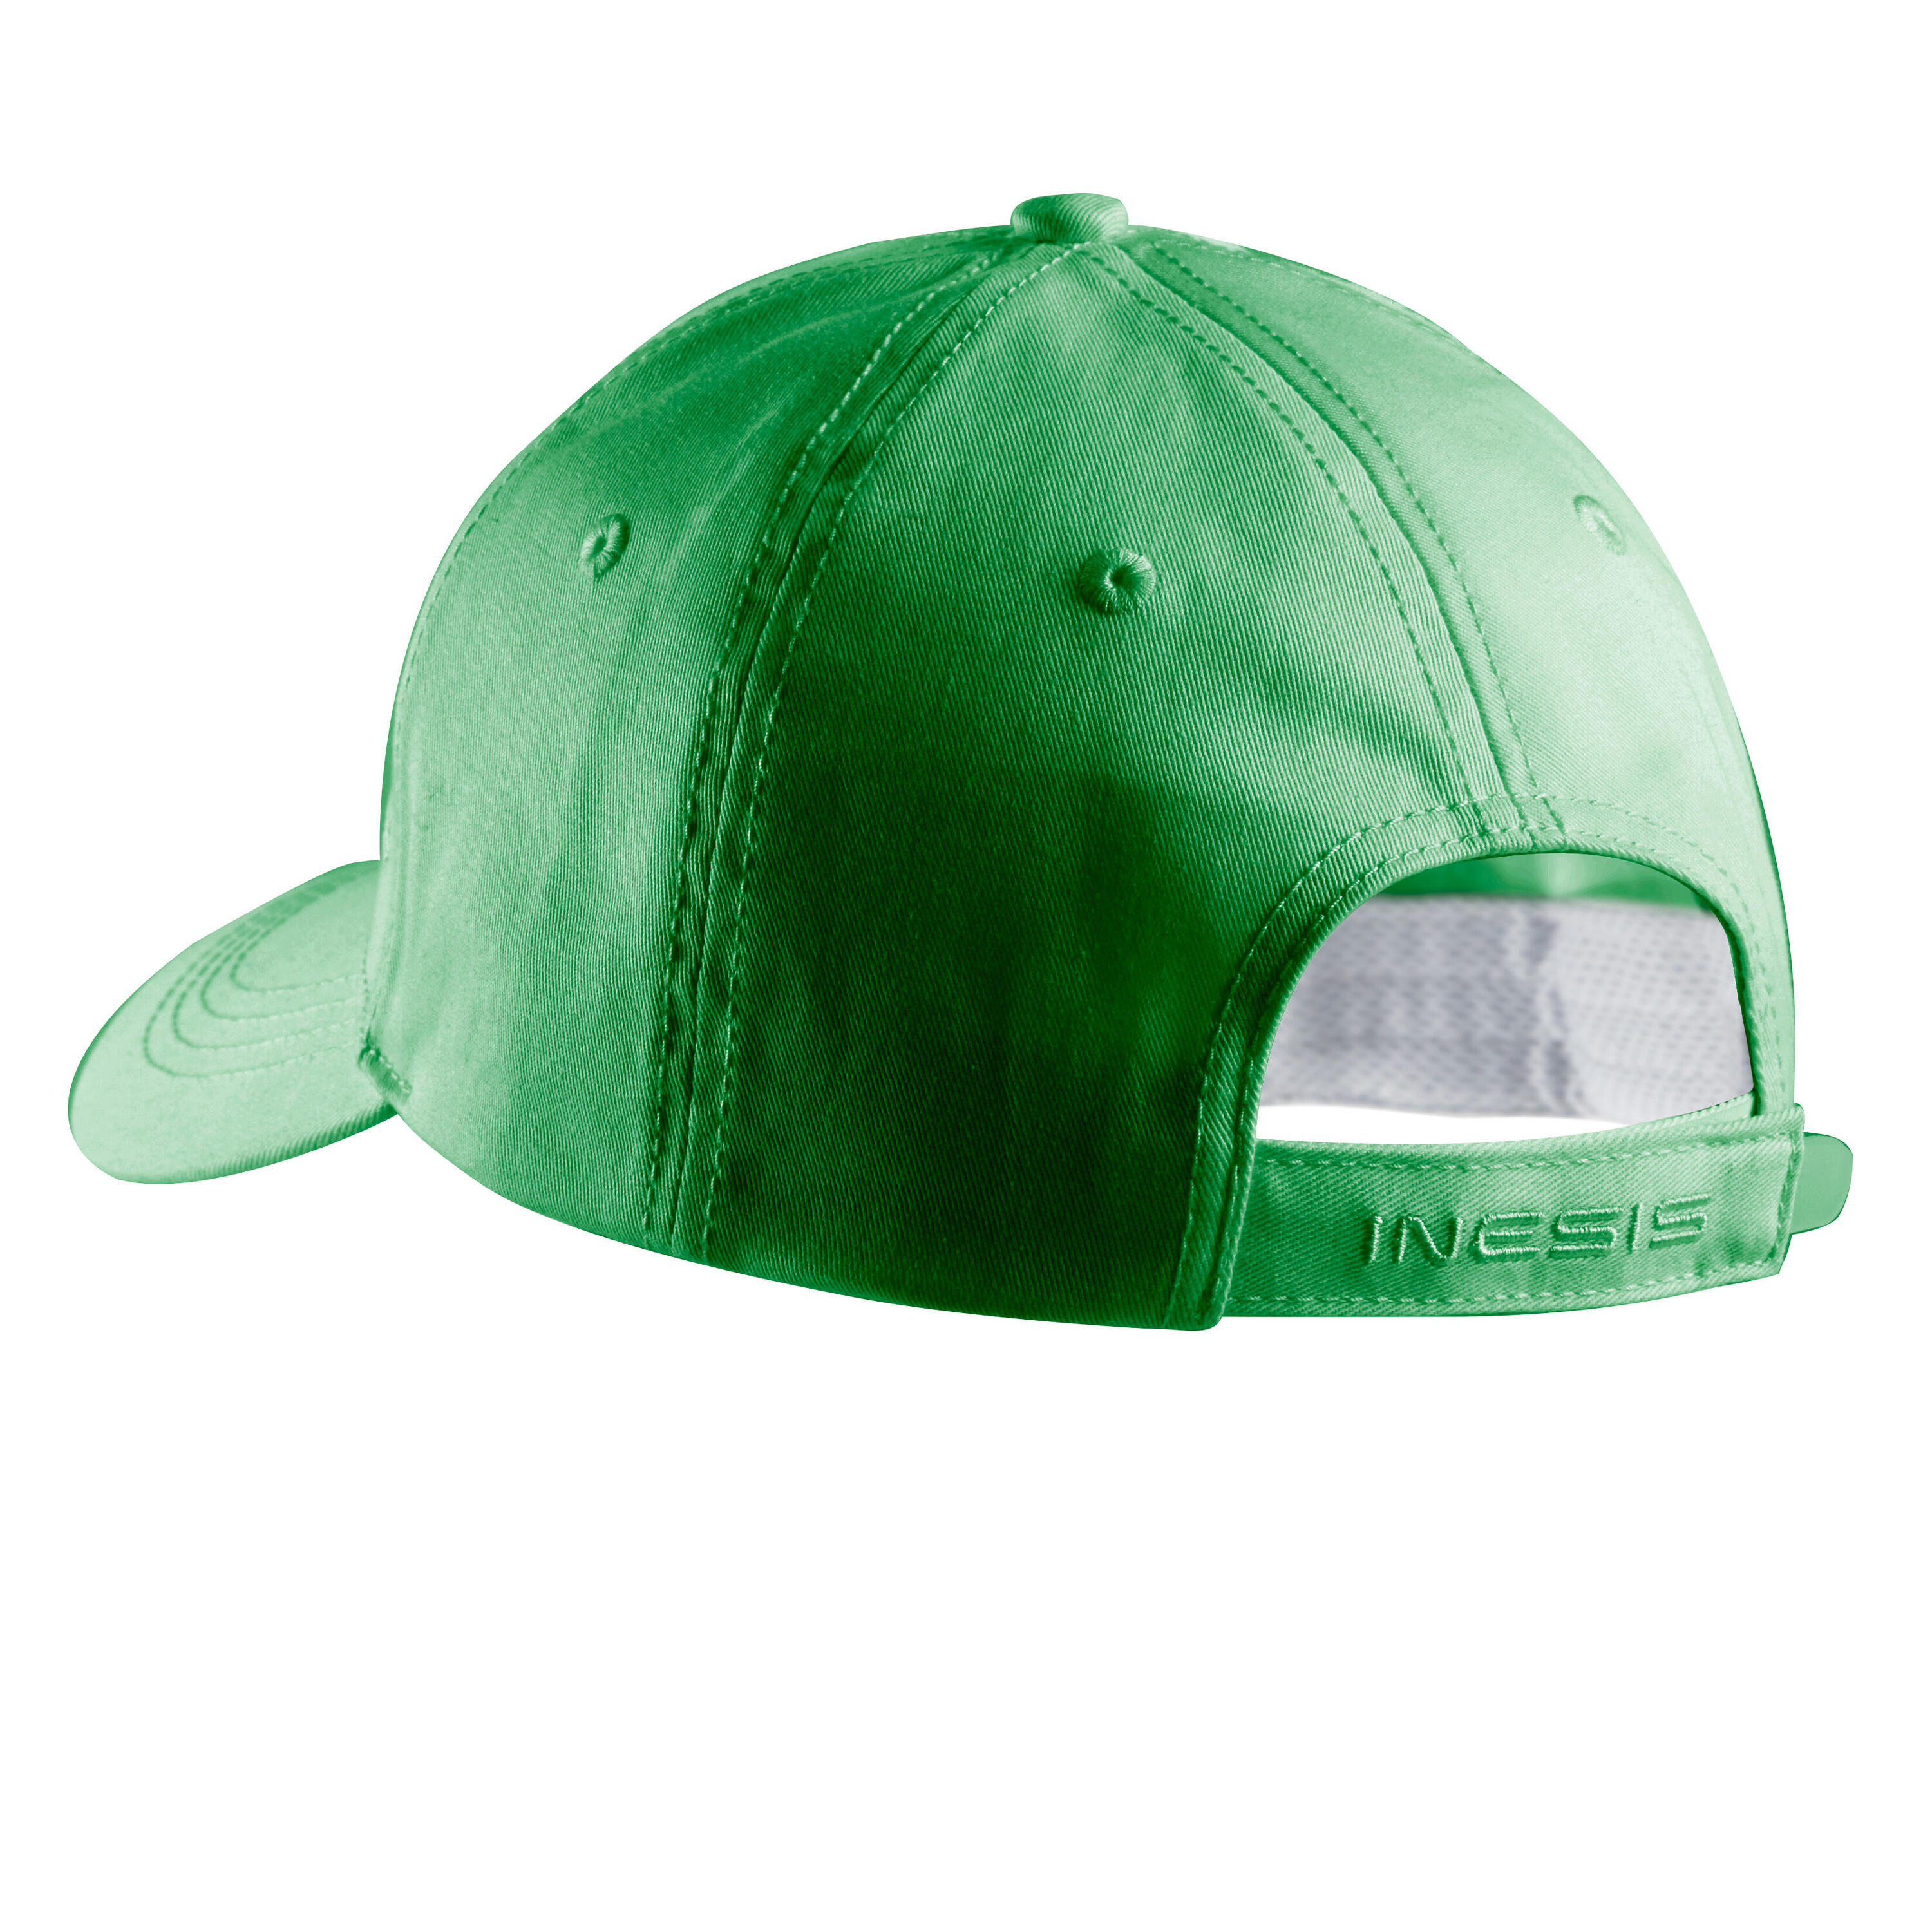 Adult's golf cap - MW 500 forest green 3/3